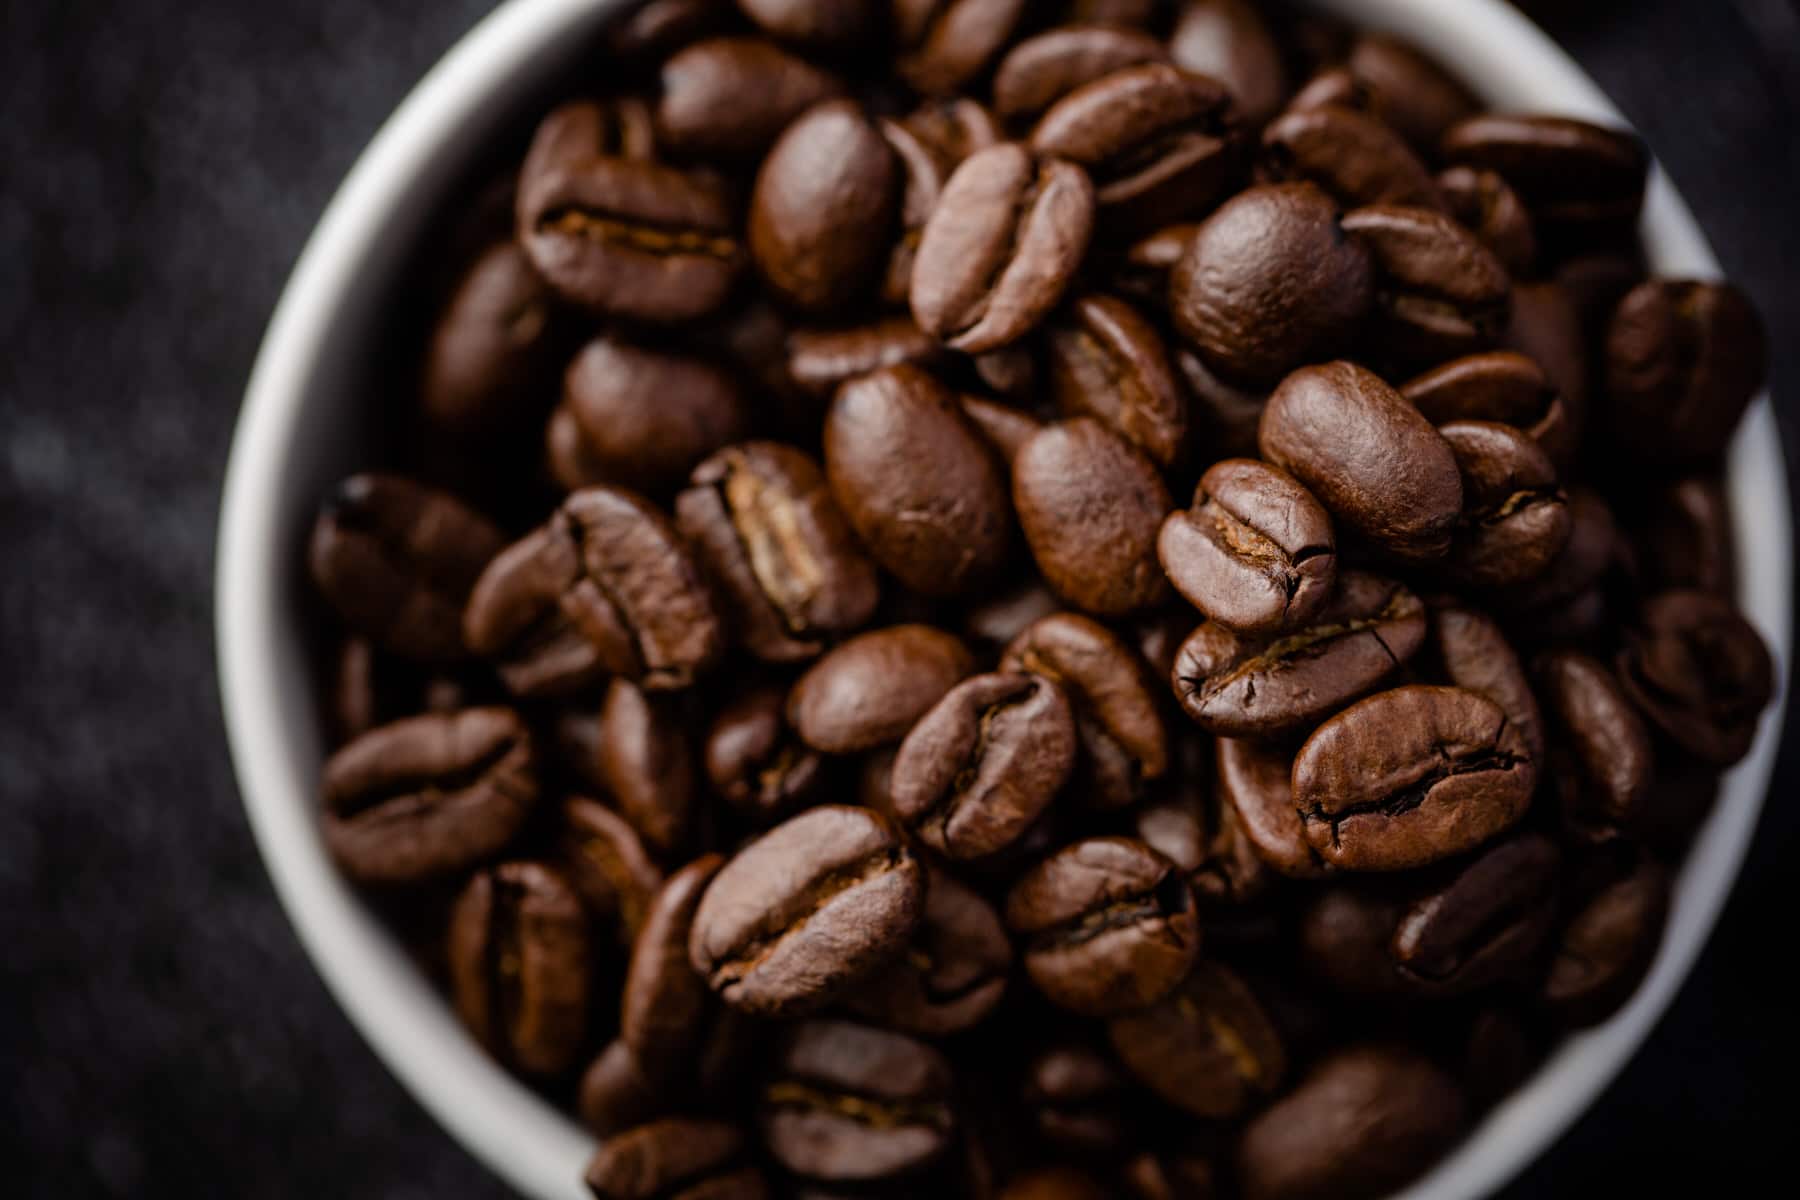 A bowl of coffee beans taken by a rutland food photographer